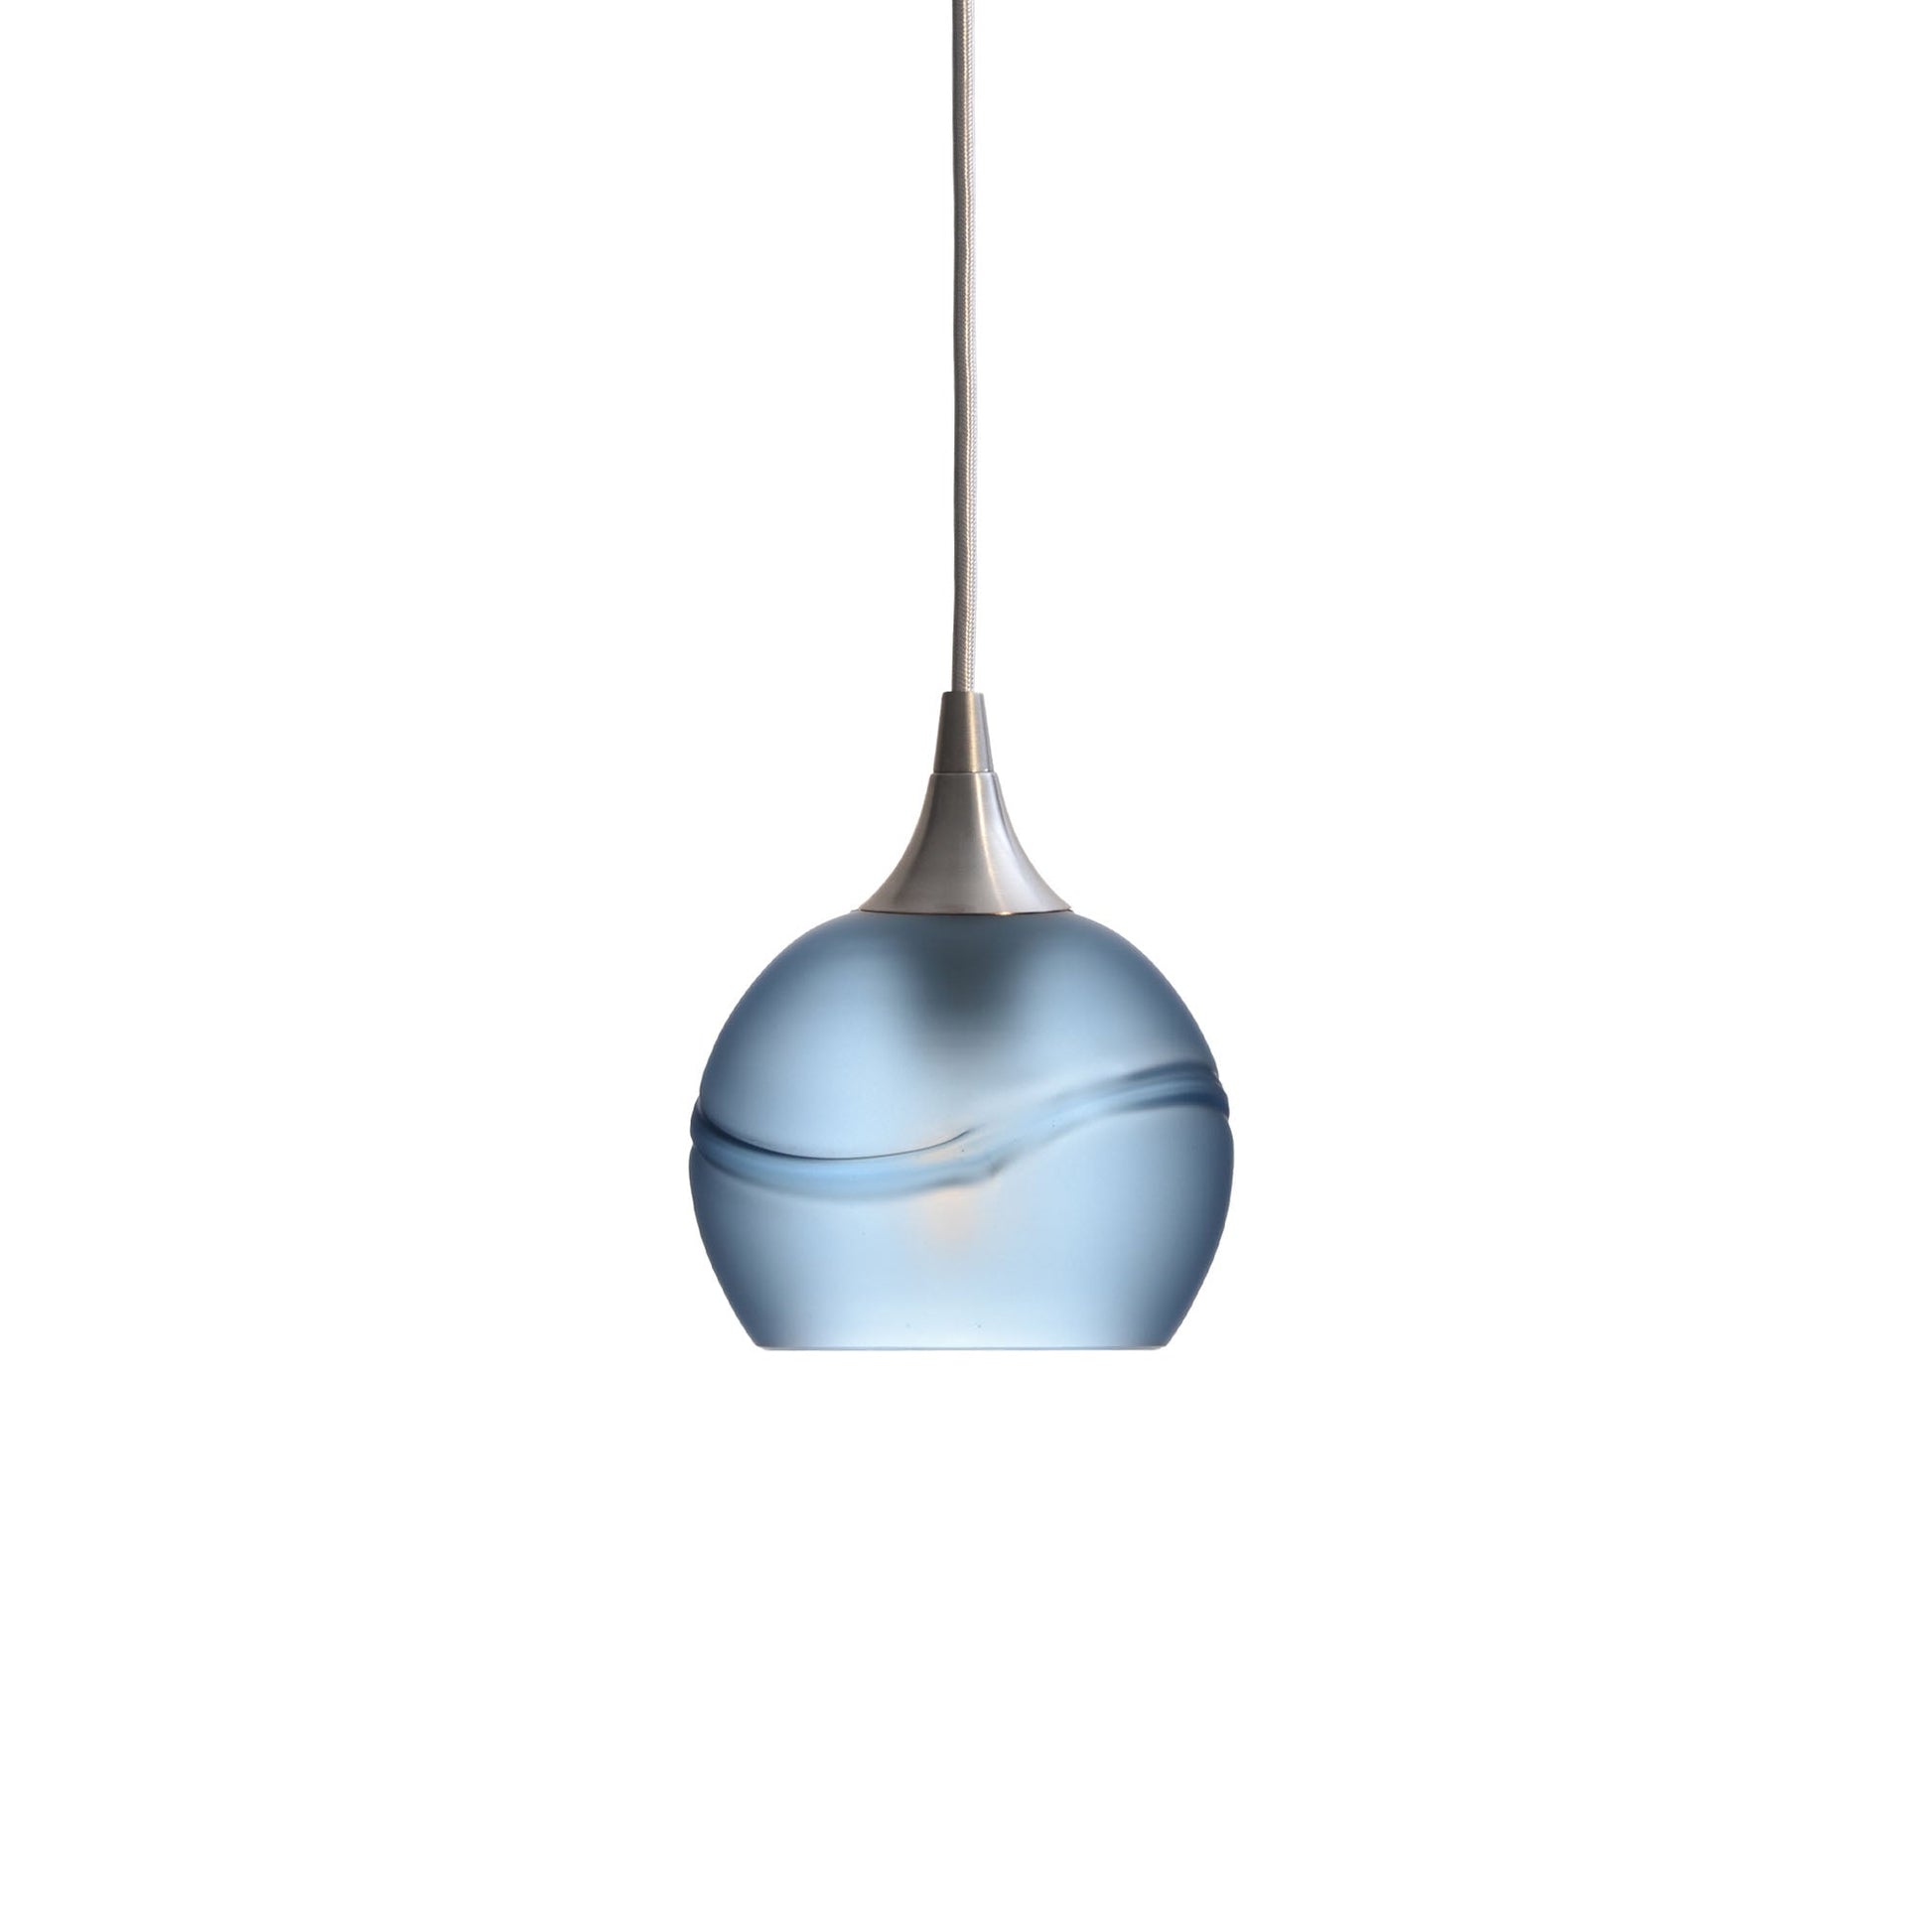 763 Glacial: Single Pendant Light-Glass-Bicycle Glass Co - Hotshop-Steel Blue-Brushed Nickel-Bicycle Glass Co